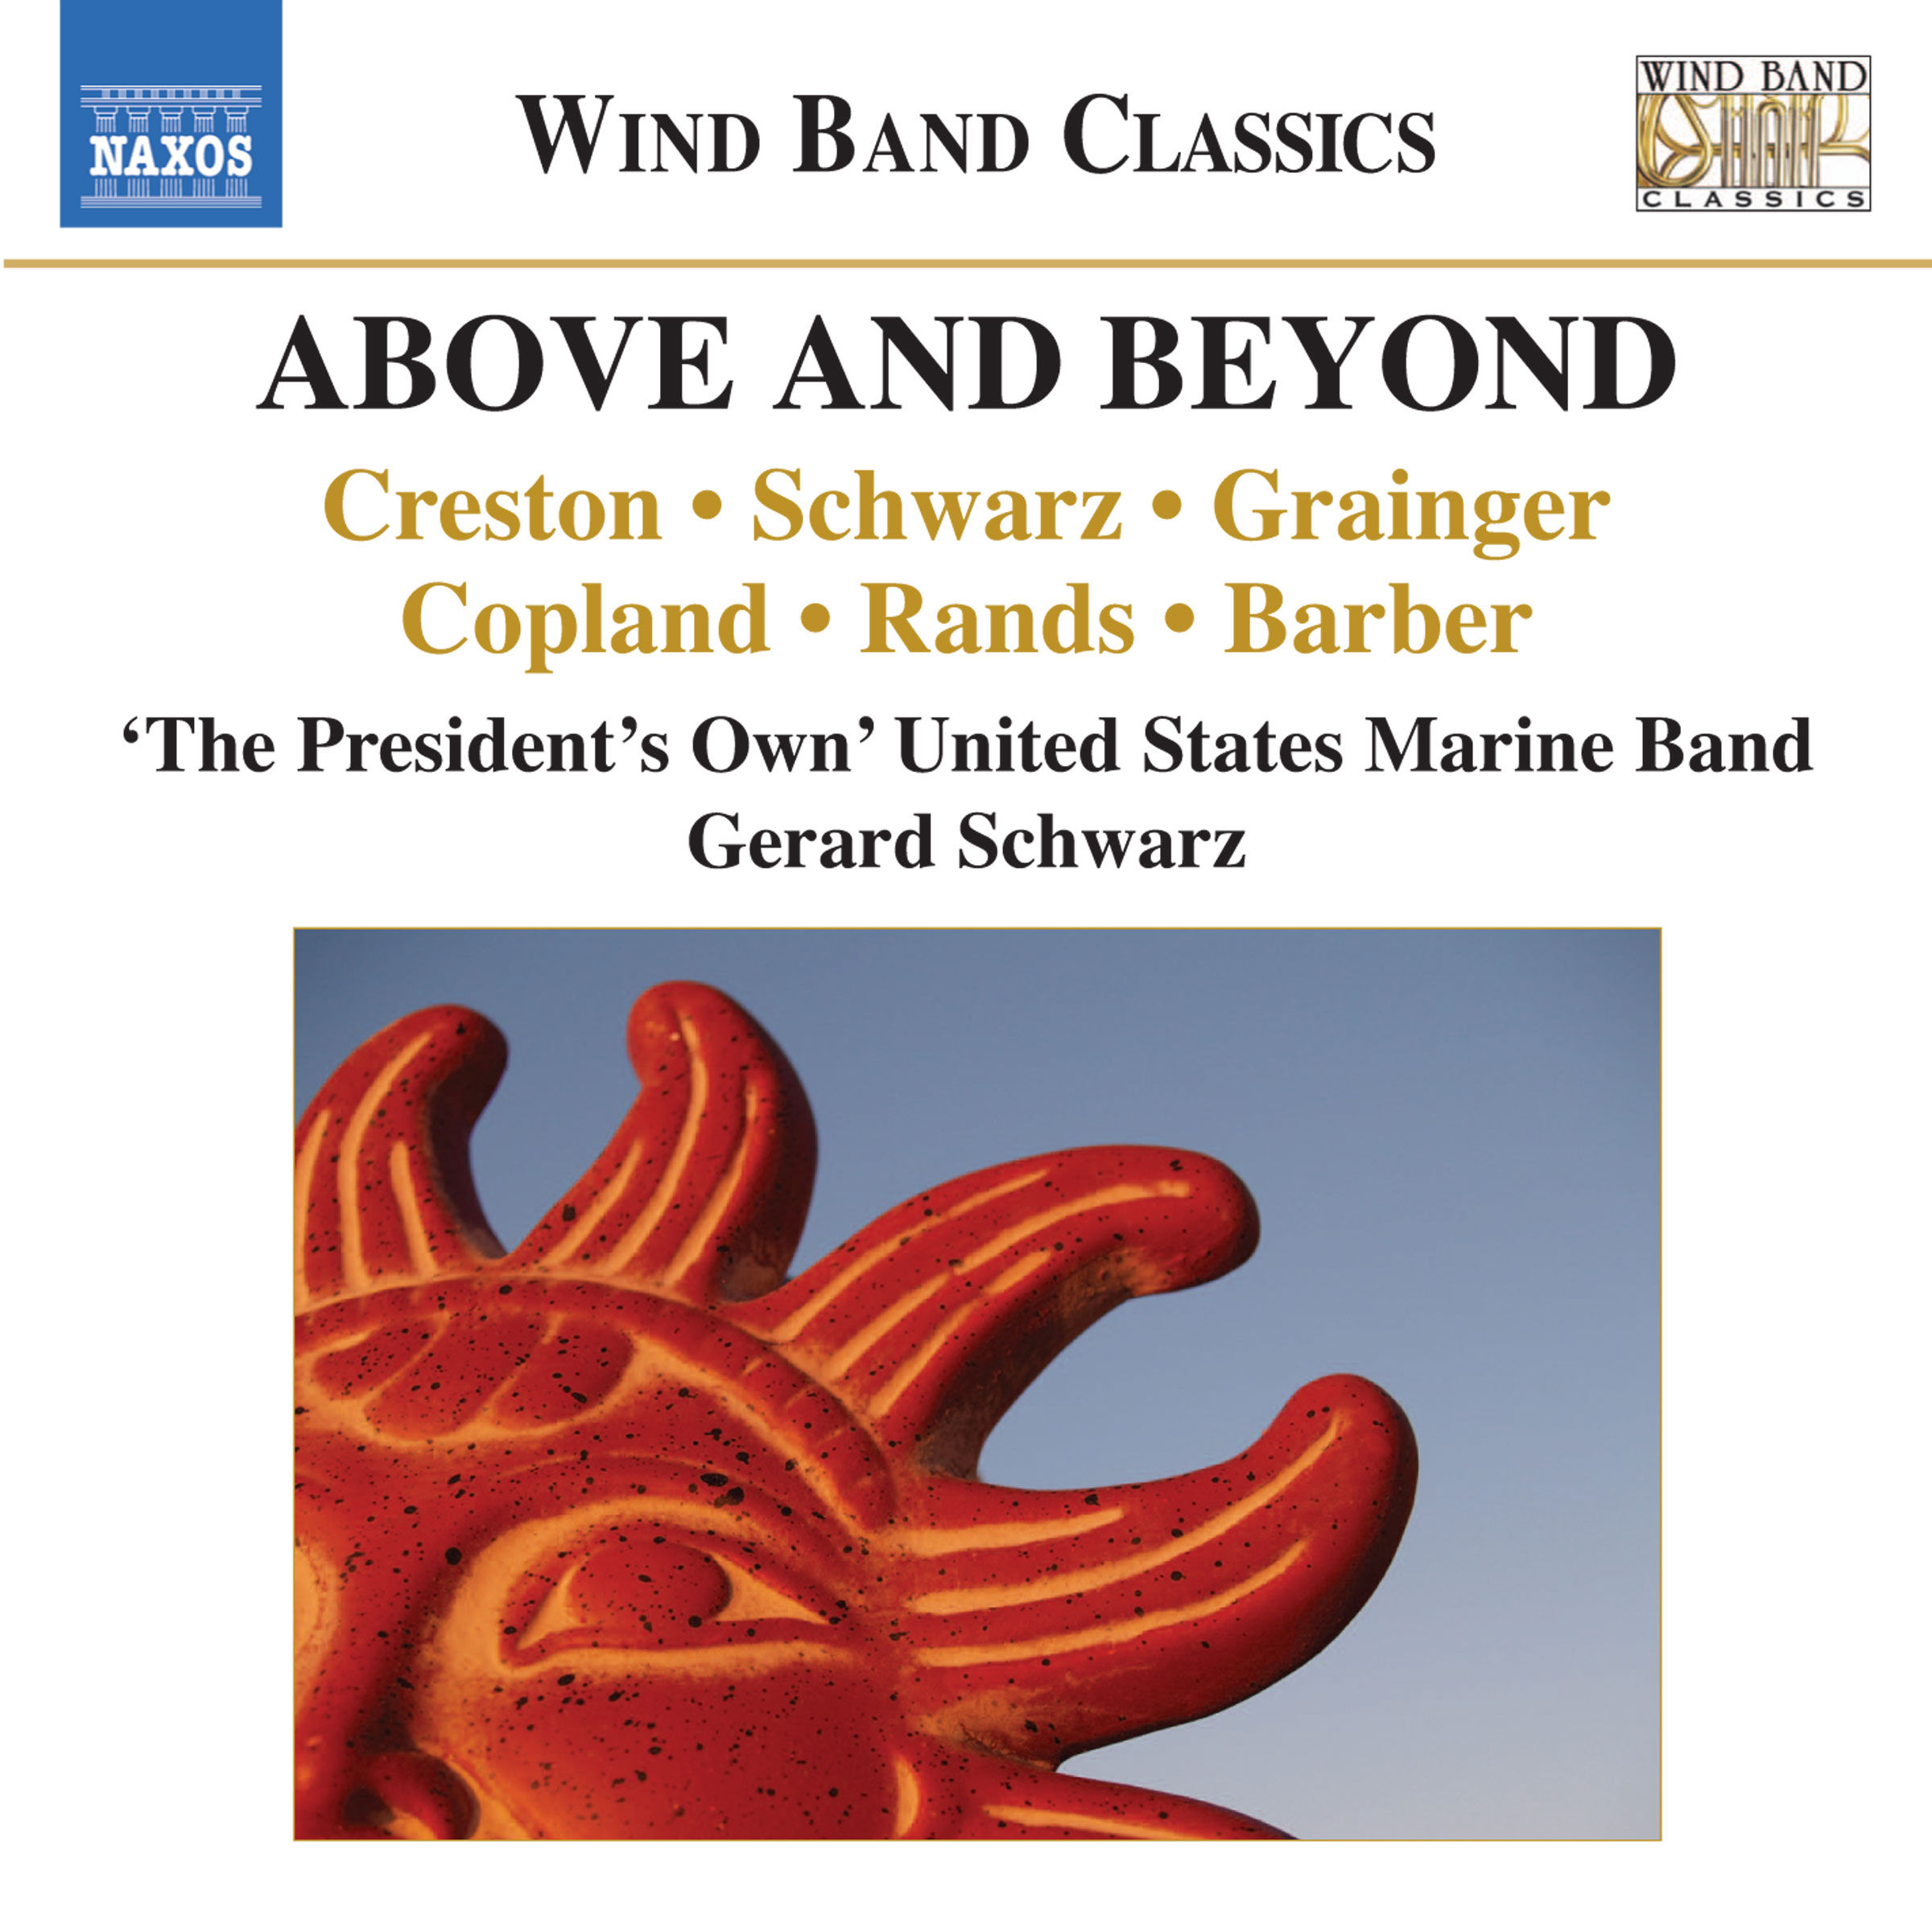 Gerard Schwarz, President's Own United States Marine Band - Above and Beyond